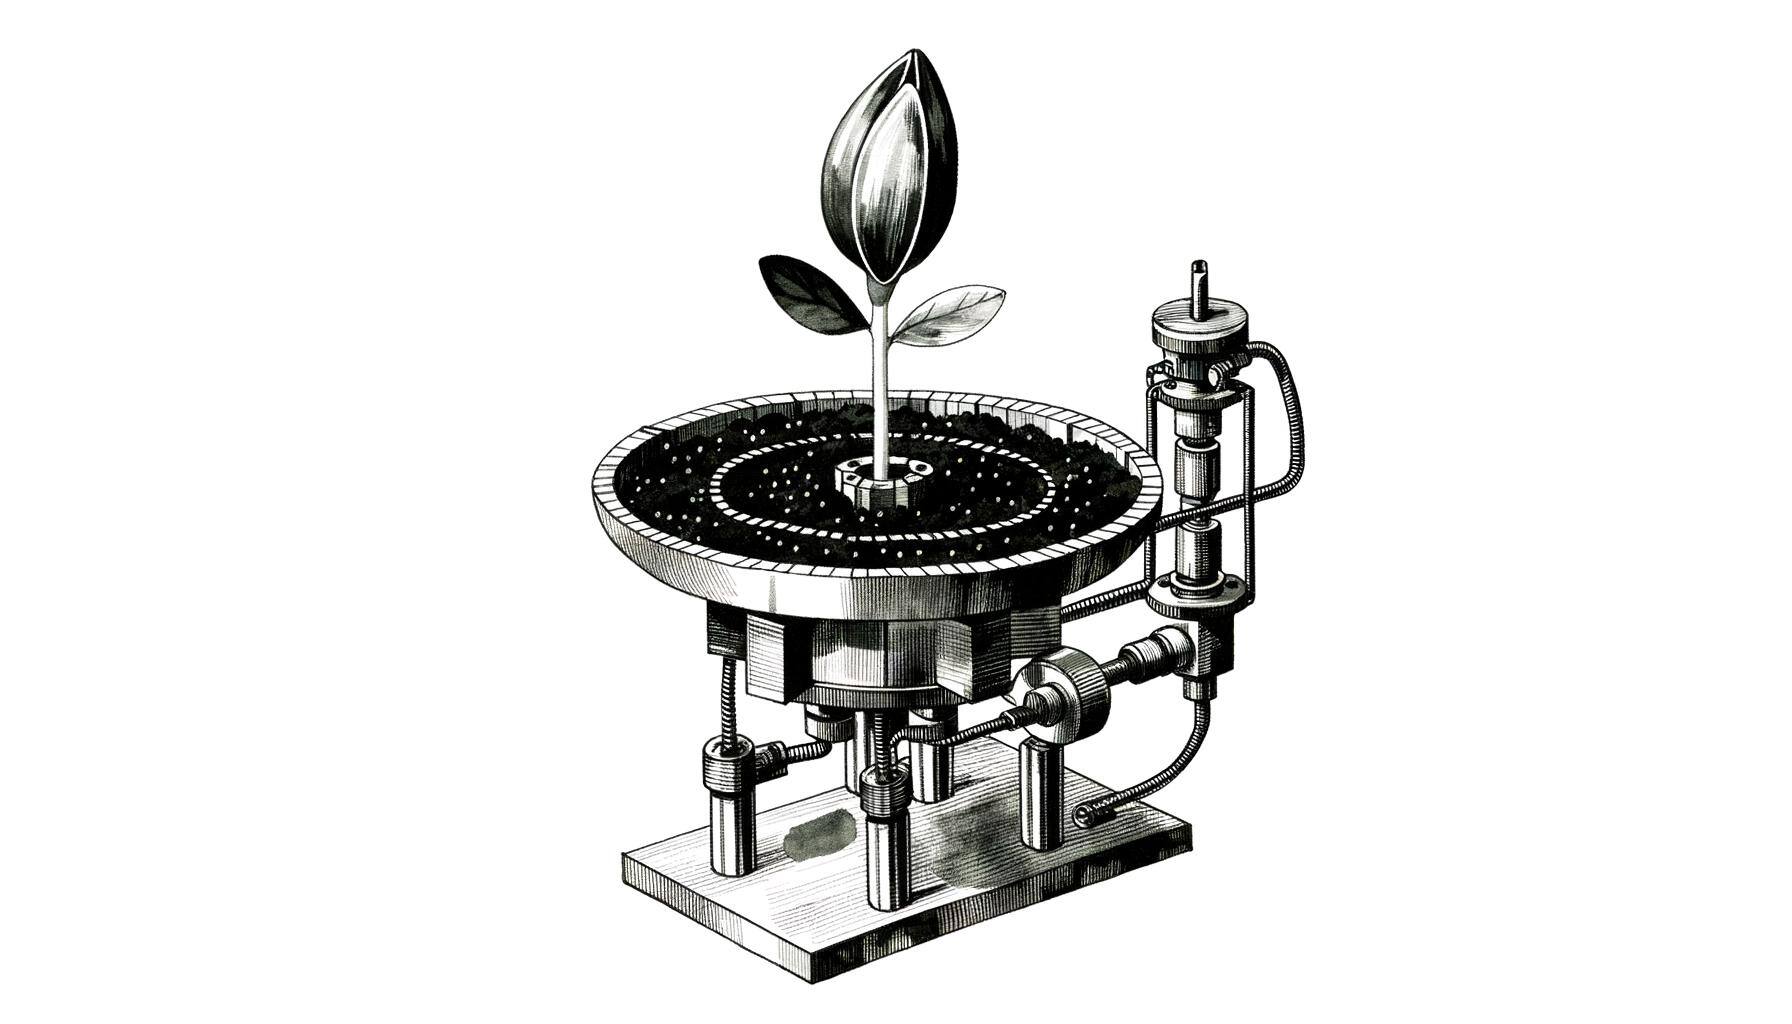 A grayscale image of a machine that cultivates a single plant that is a seedling in germination stage of growth-1